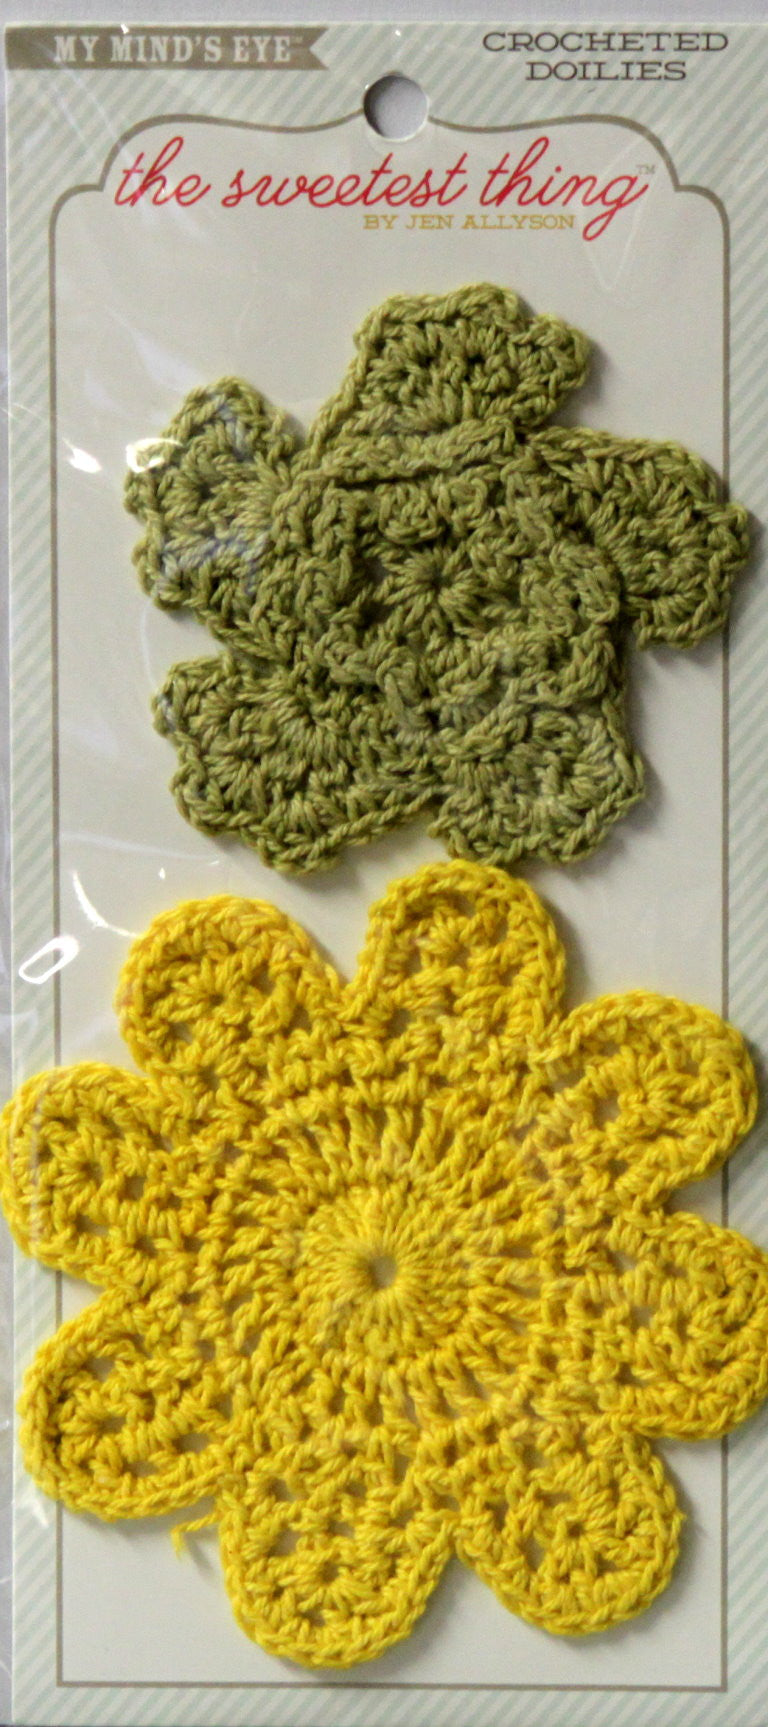 My Mind's Eye The Sweetest Thing Honey SImply Lovely Crocheted Doilies - SCRAPBOOKFARE